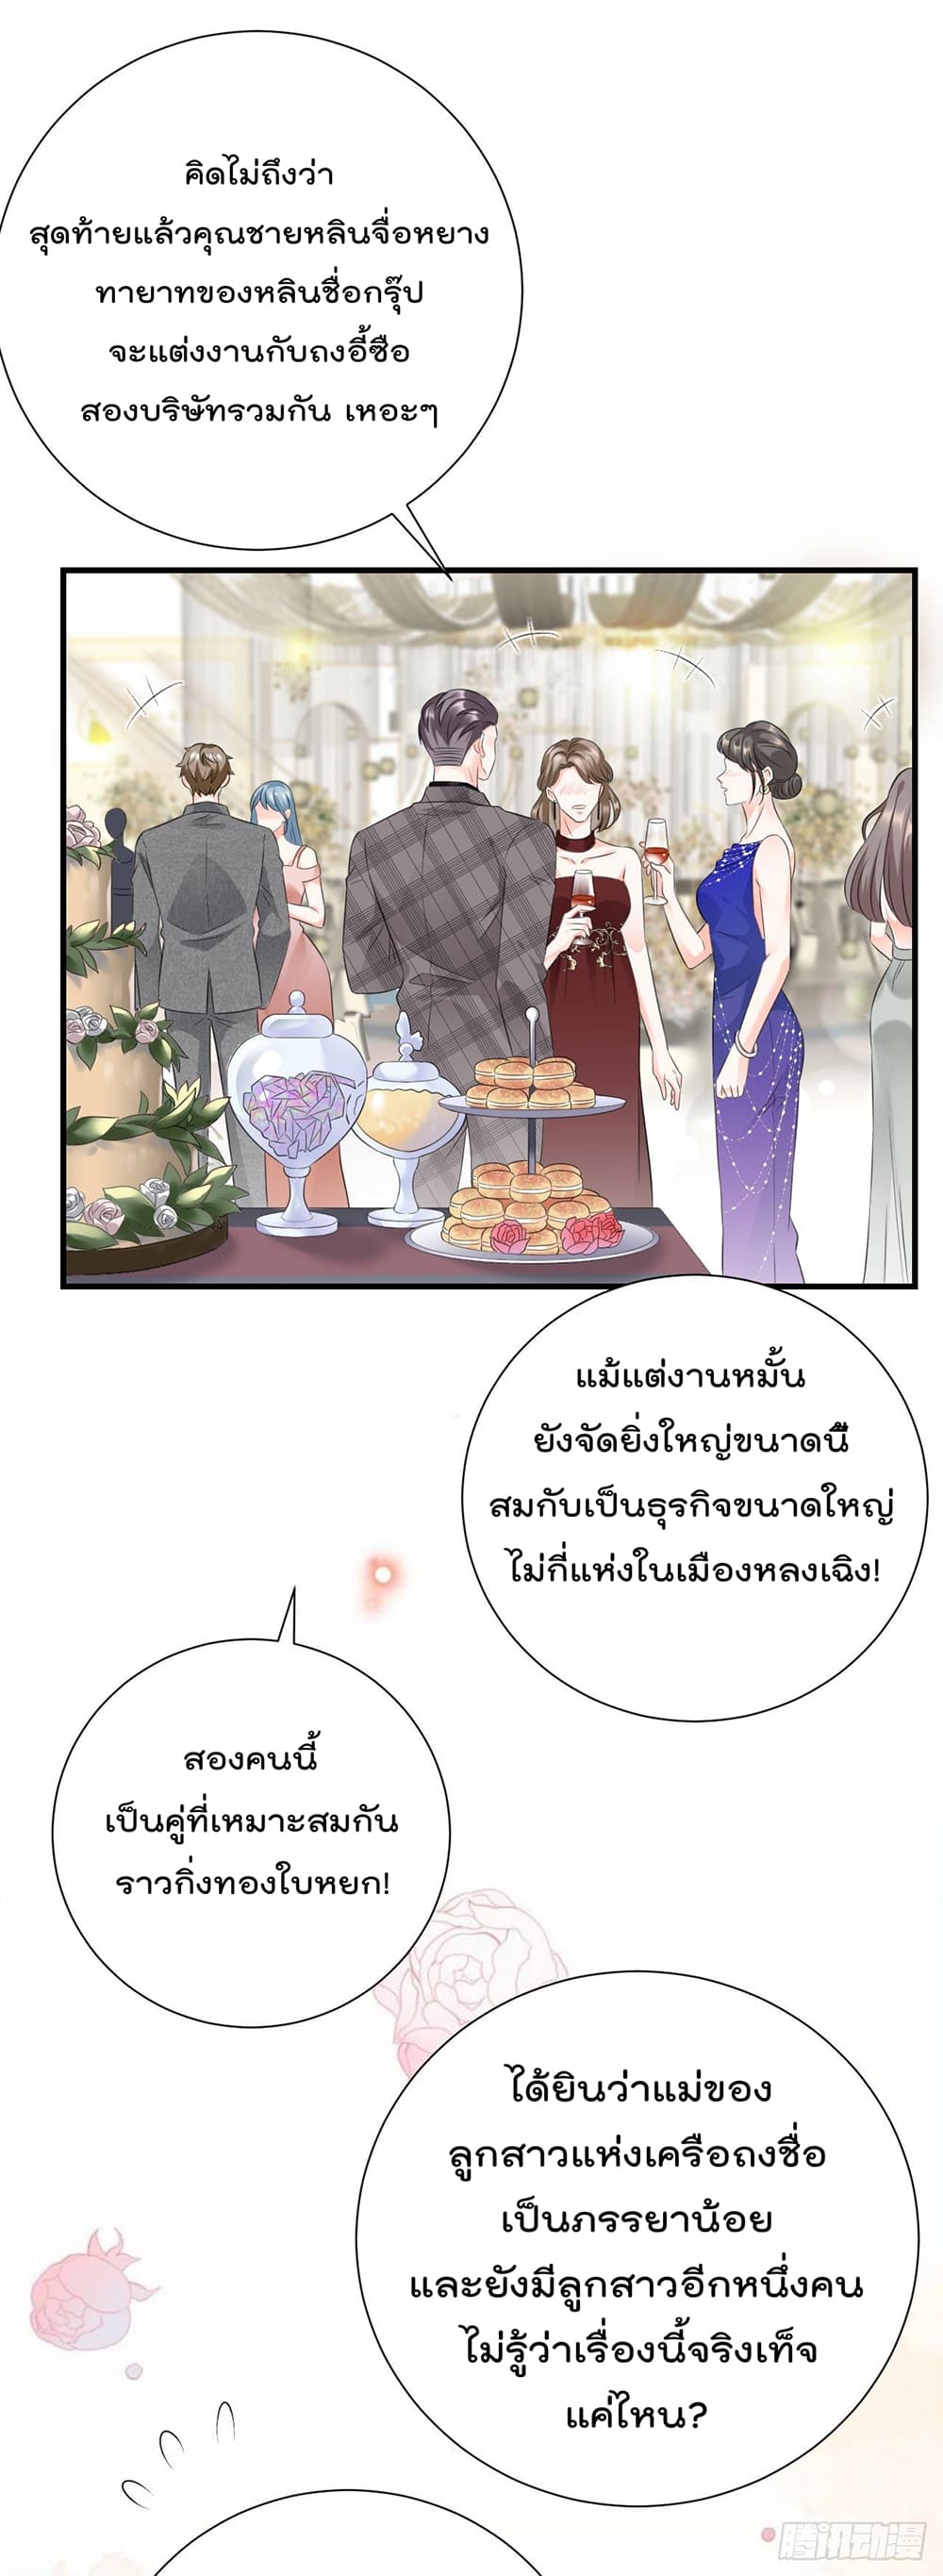 What Can the Eldest Lady Have คุณหนูใหญ่ ทำไมคุณร้ายอย่างนี้ 1-1